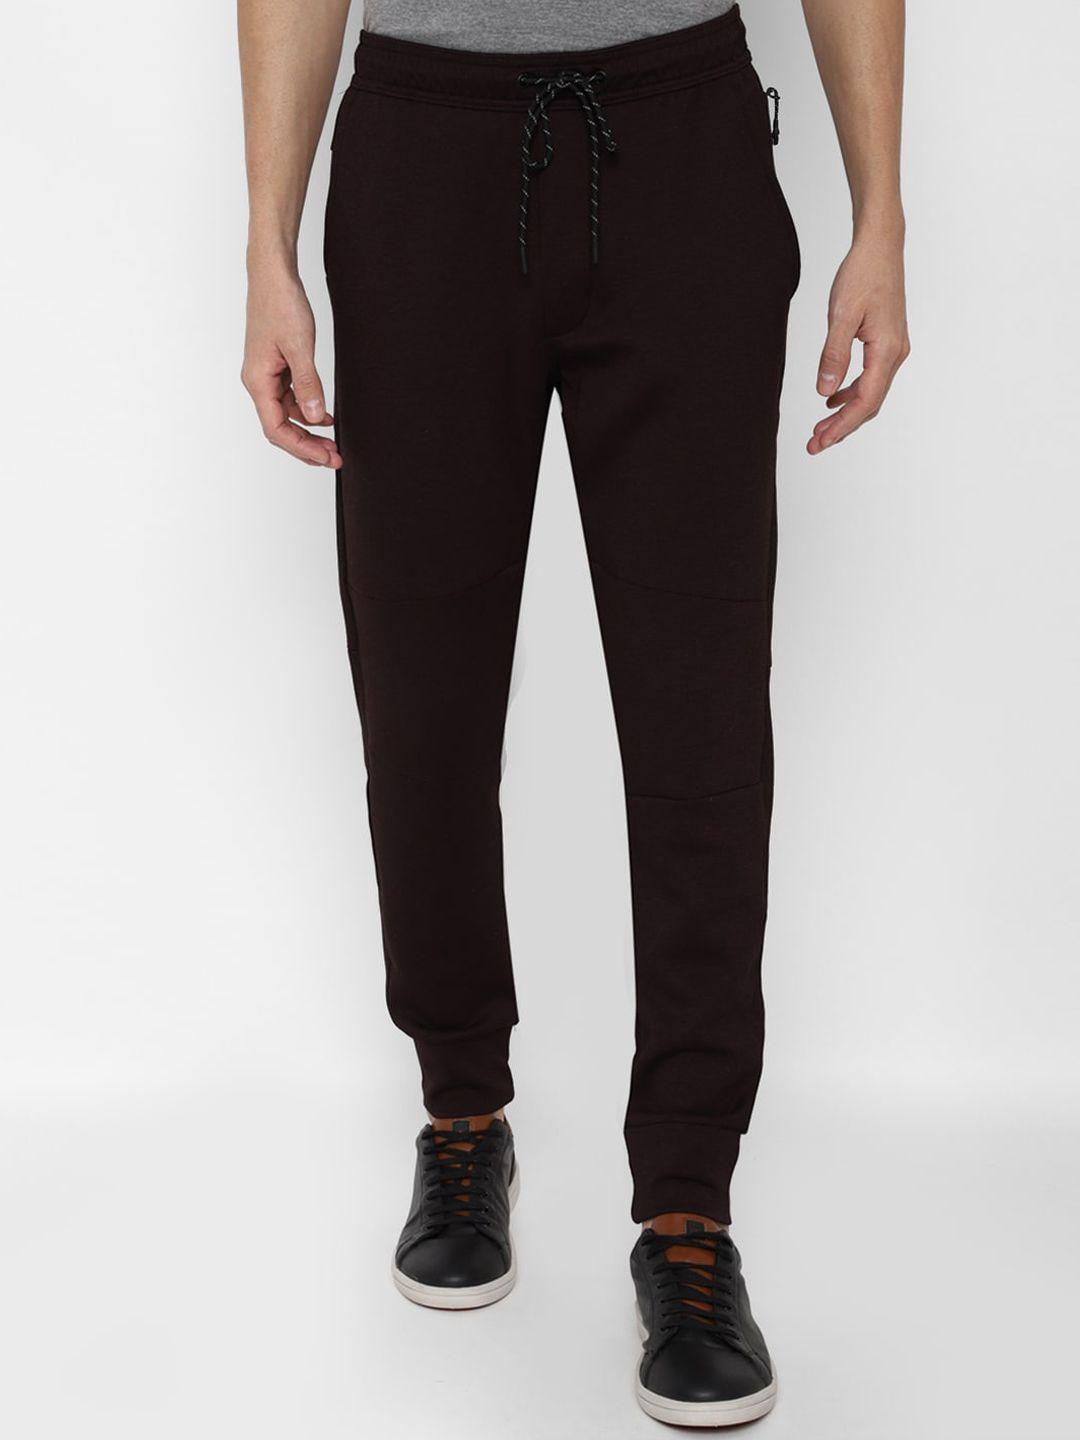 american-eagle-outfitters-men-solid-cotton-jogger-track-pants